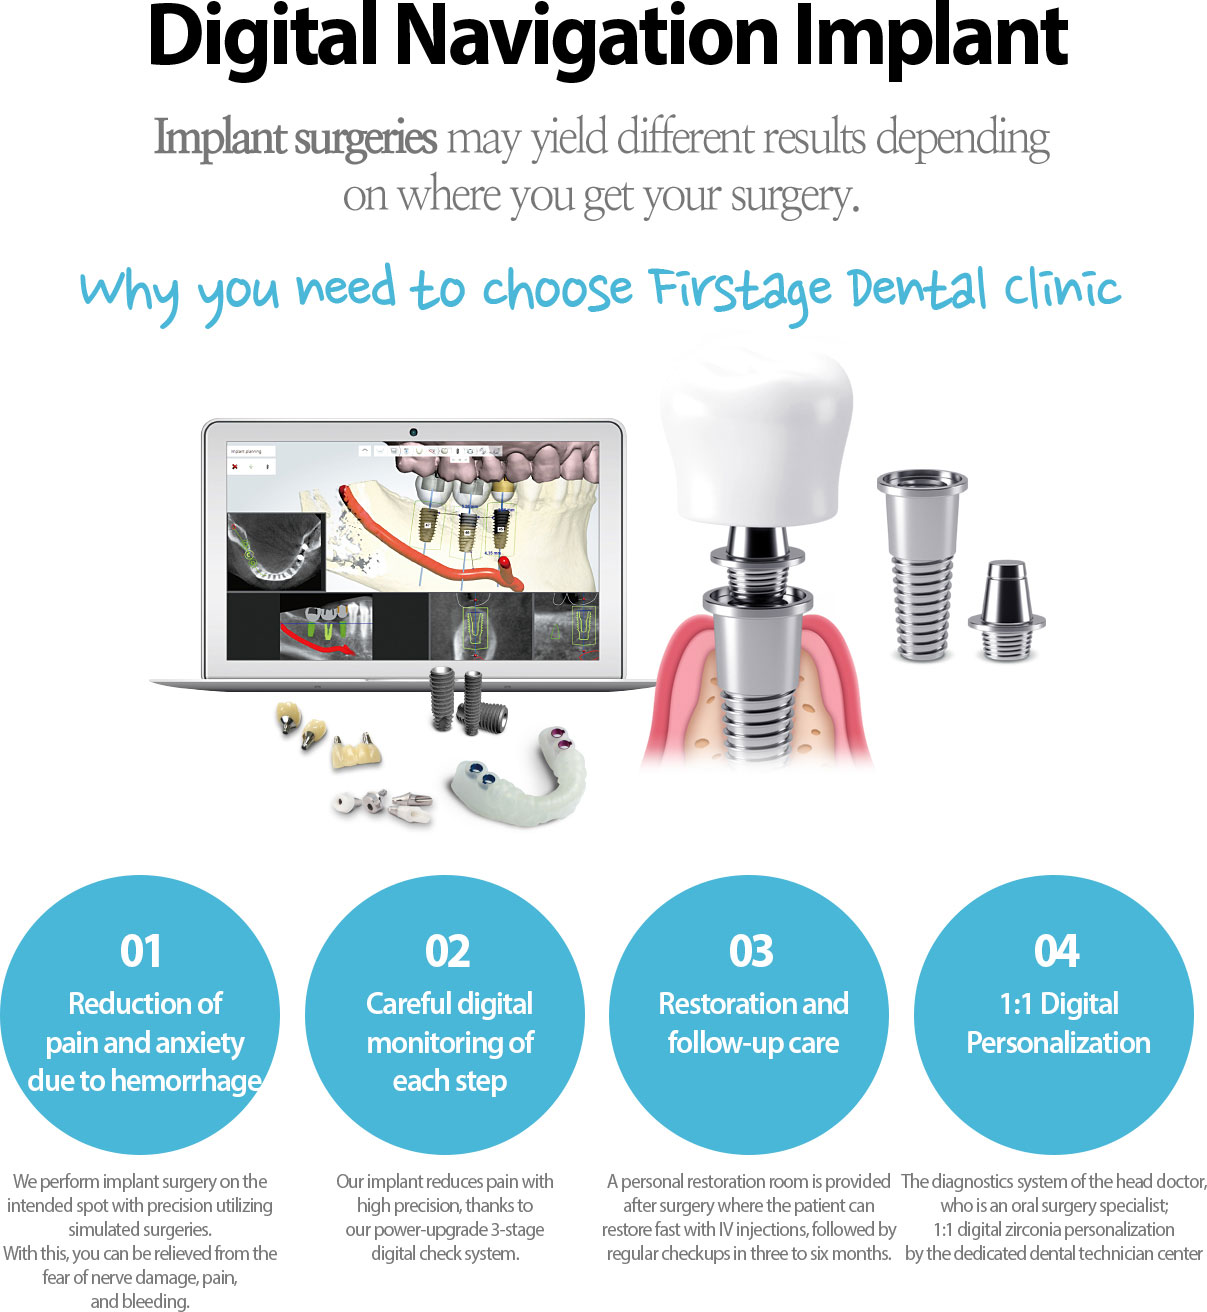 Why you need to choose Firstage Dental Clinic